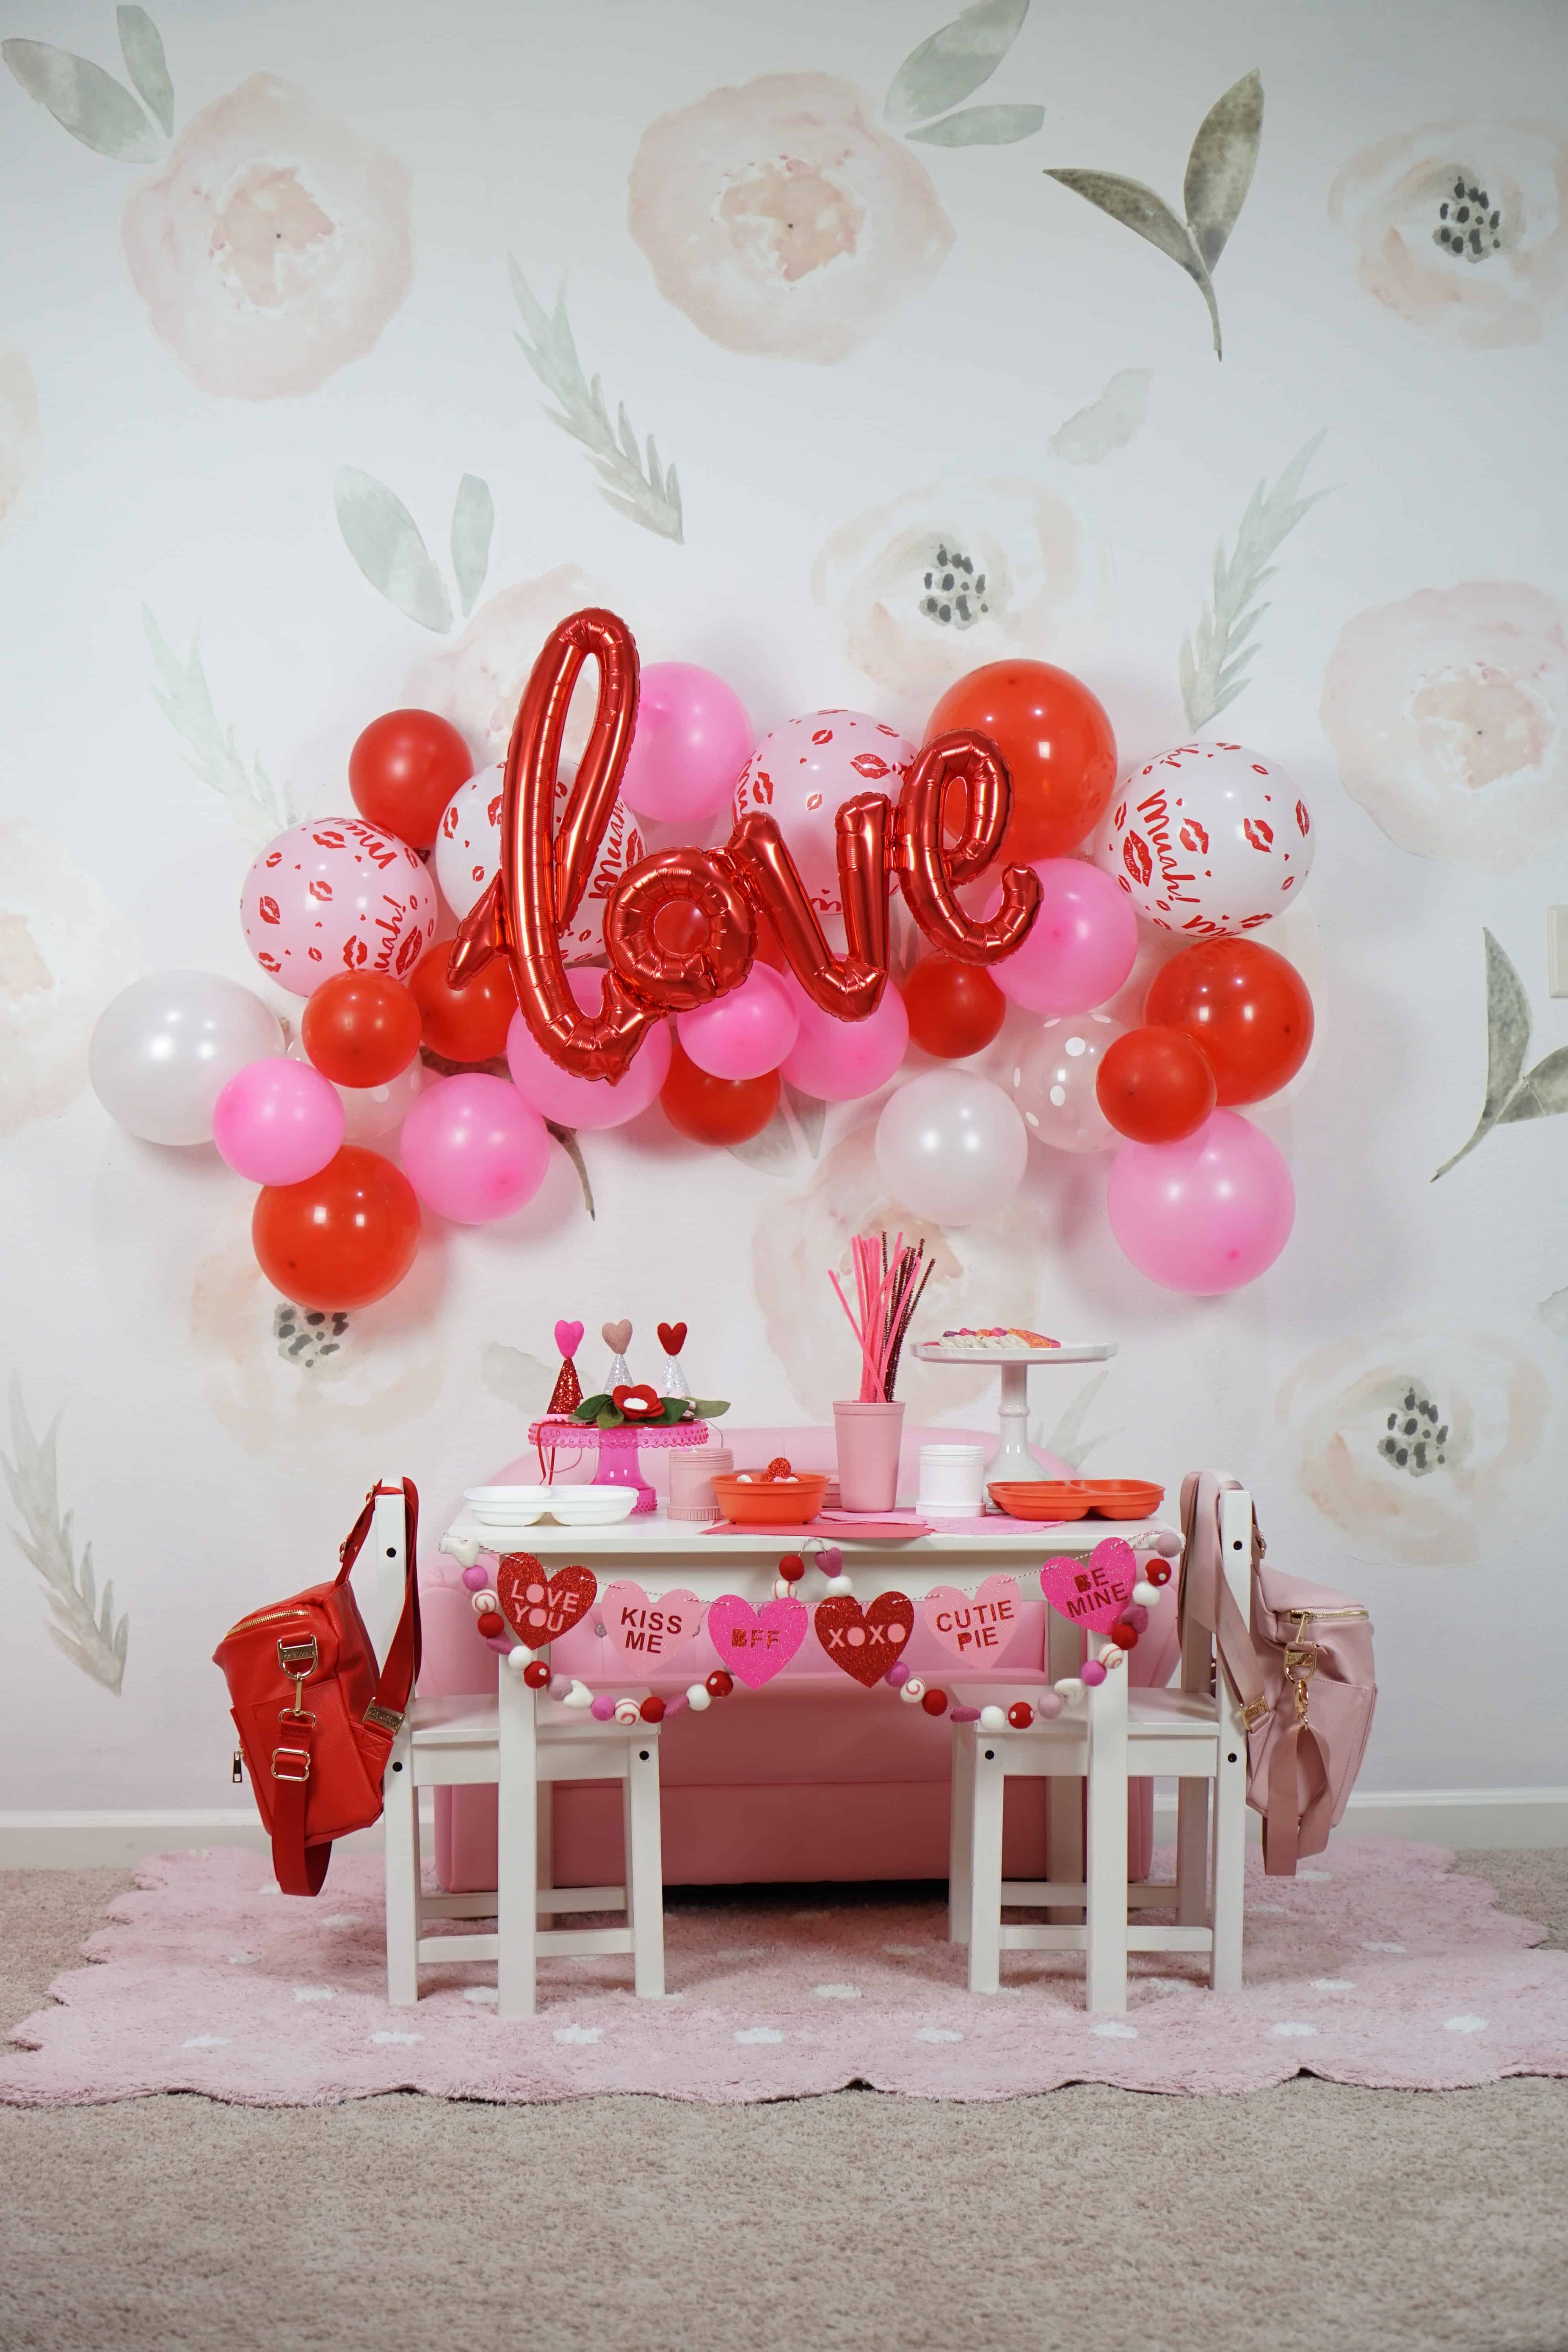 pink and red balloons and table scape with toddlers